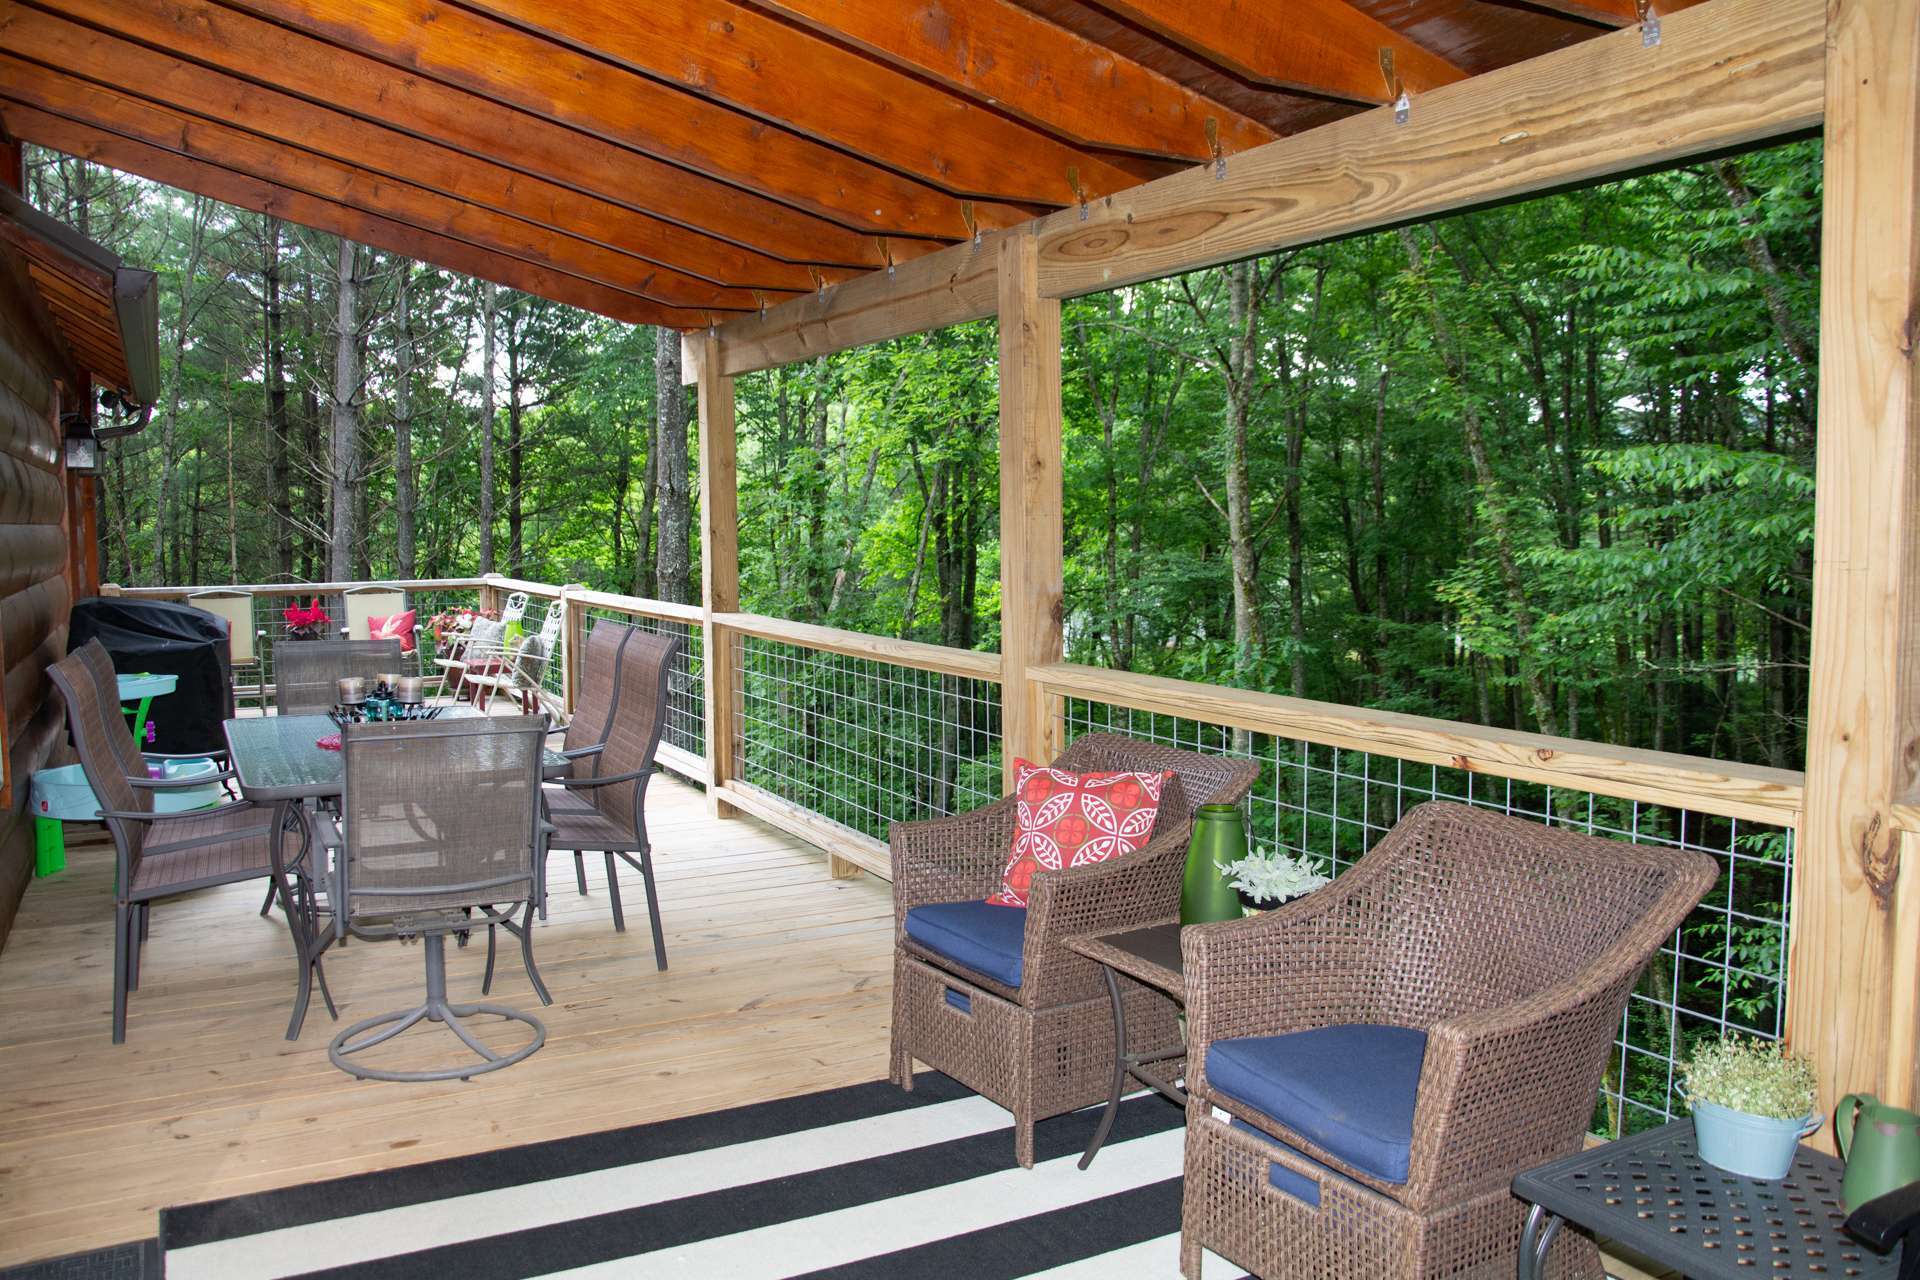 The location is peaceful and inviting through all 4 seasons in the Blue Ridge Mountains of NC.